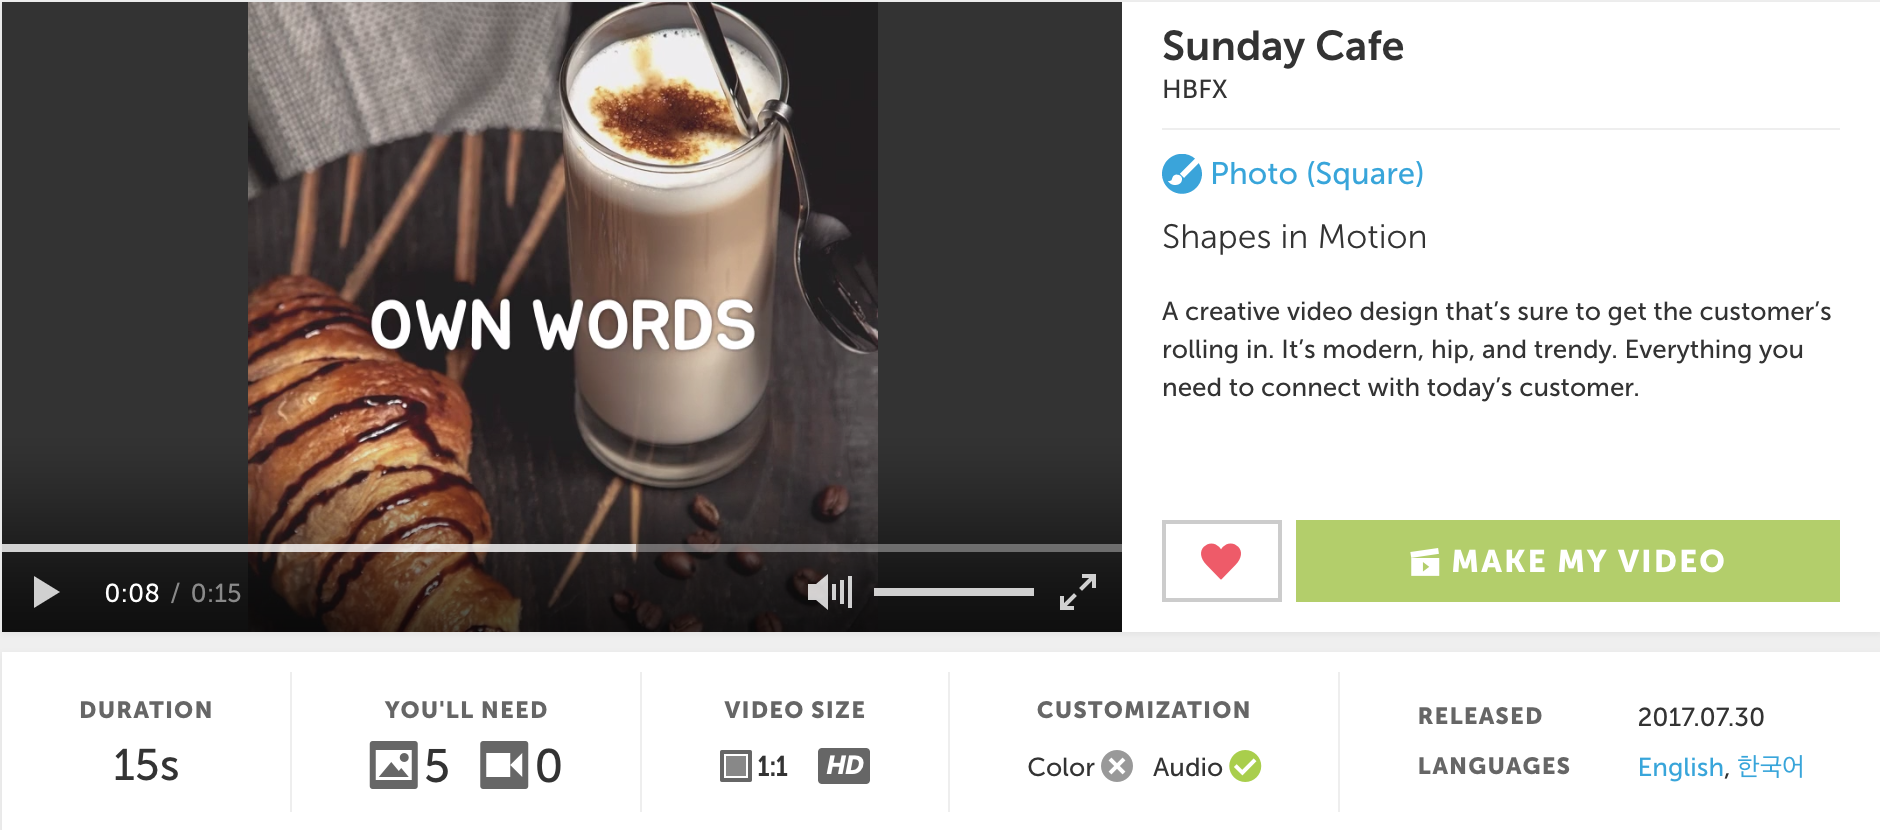 How to Use Video Design To Increase Your Conversion Rate